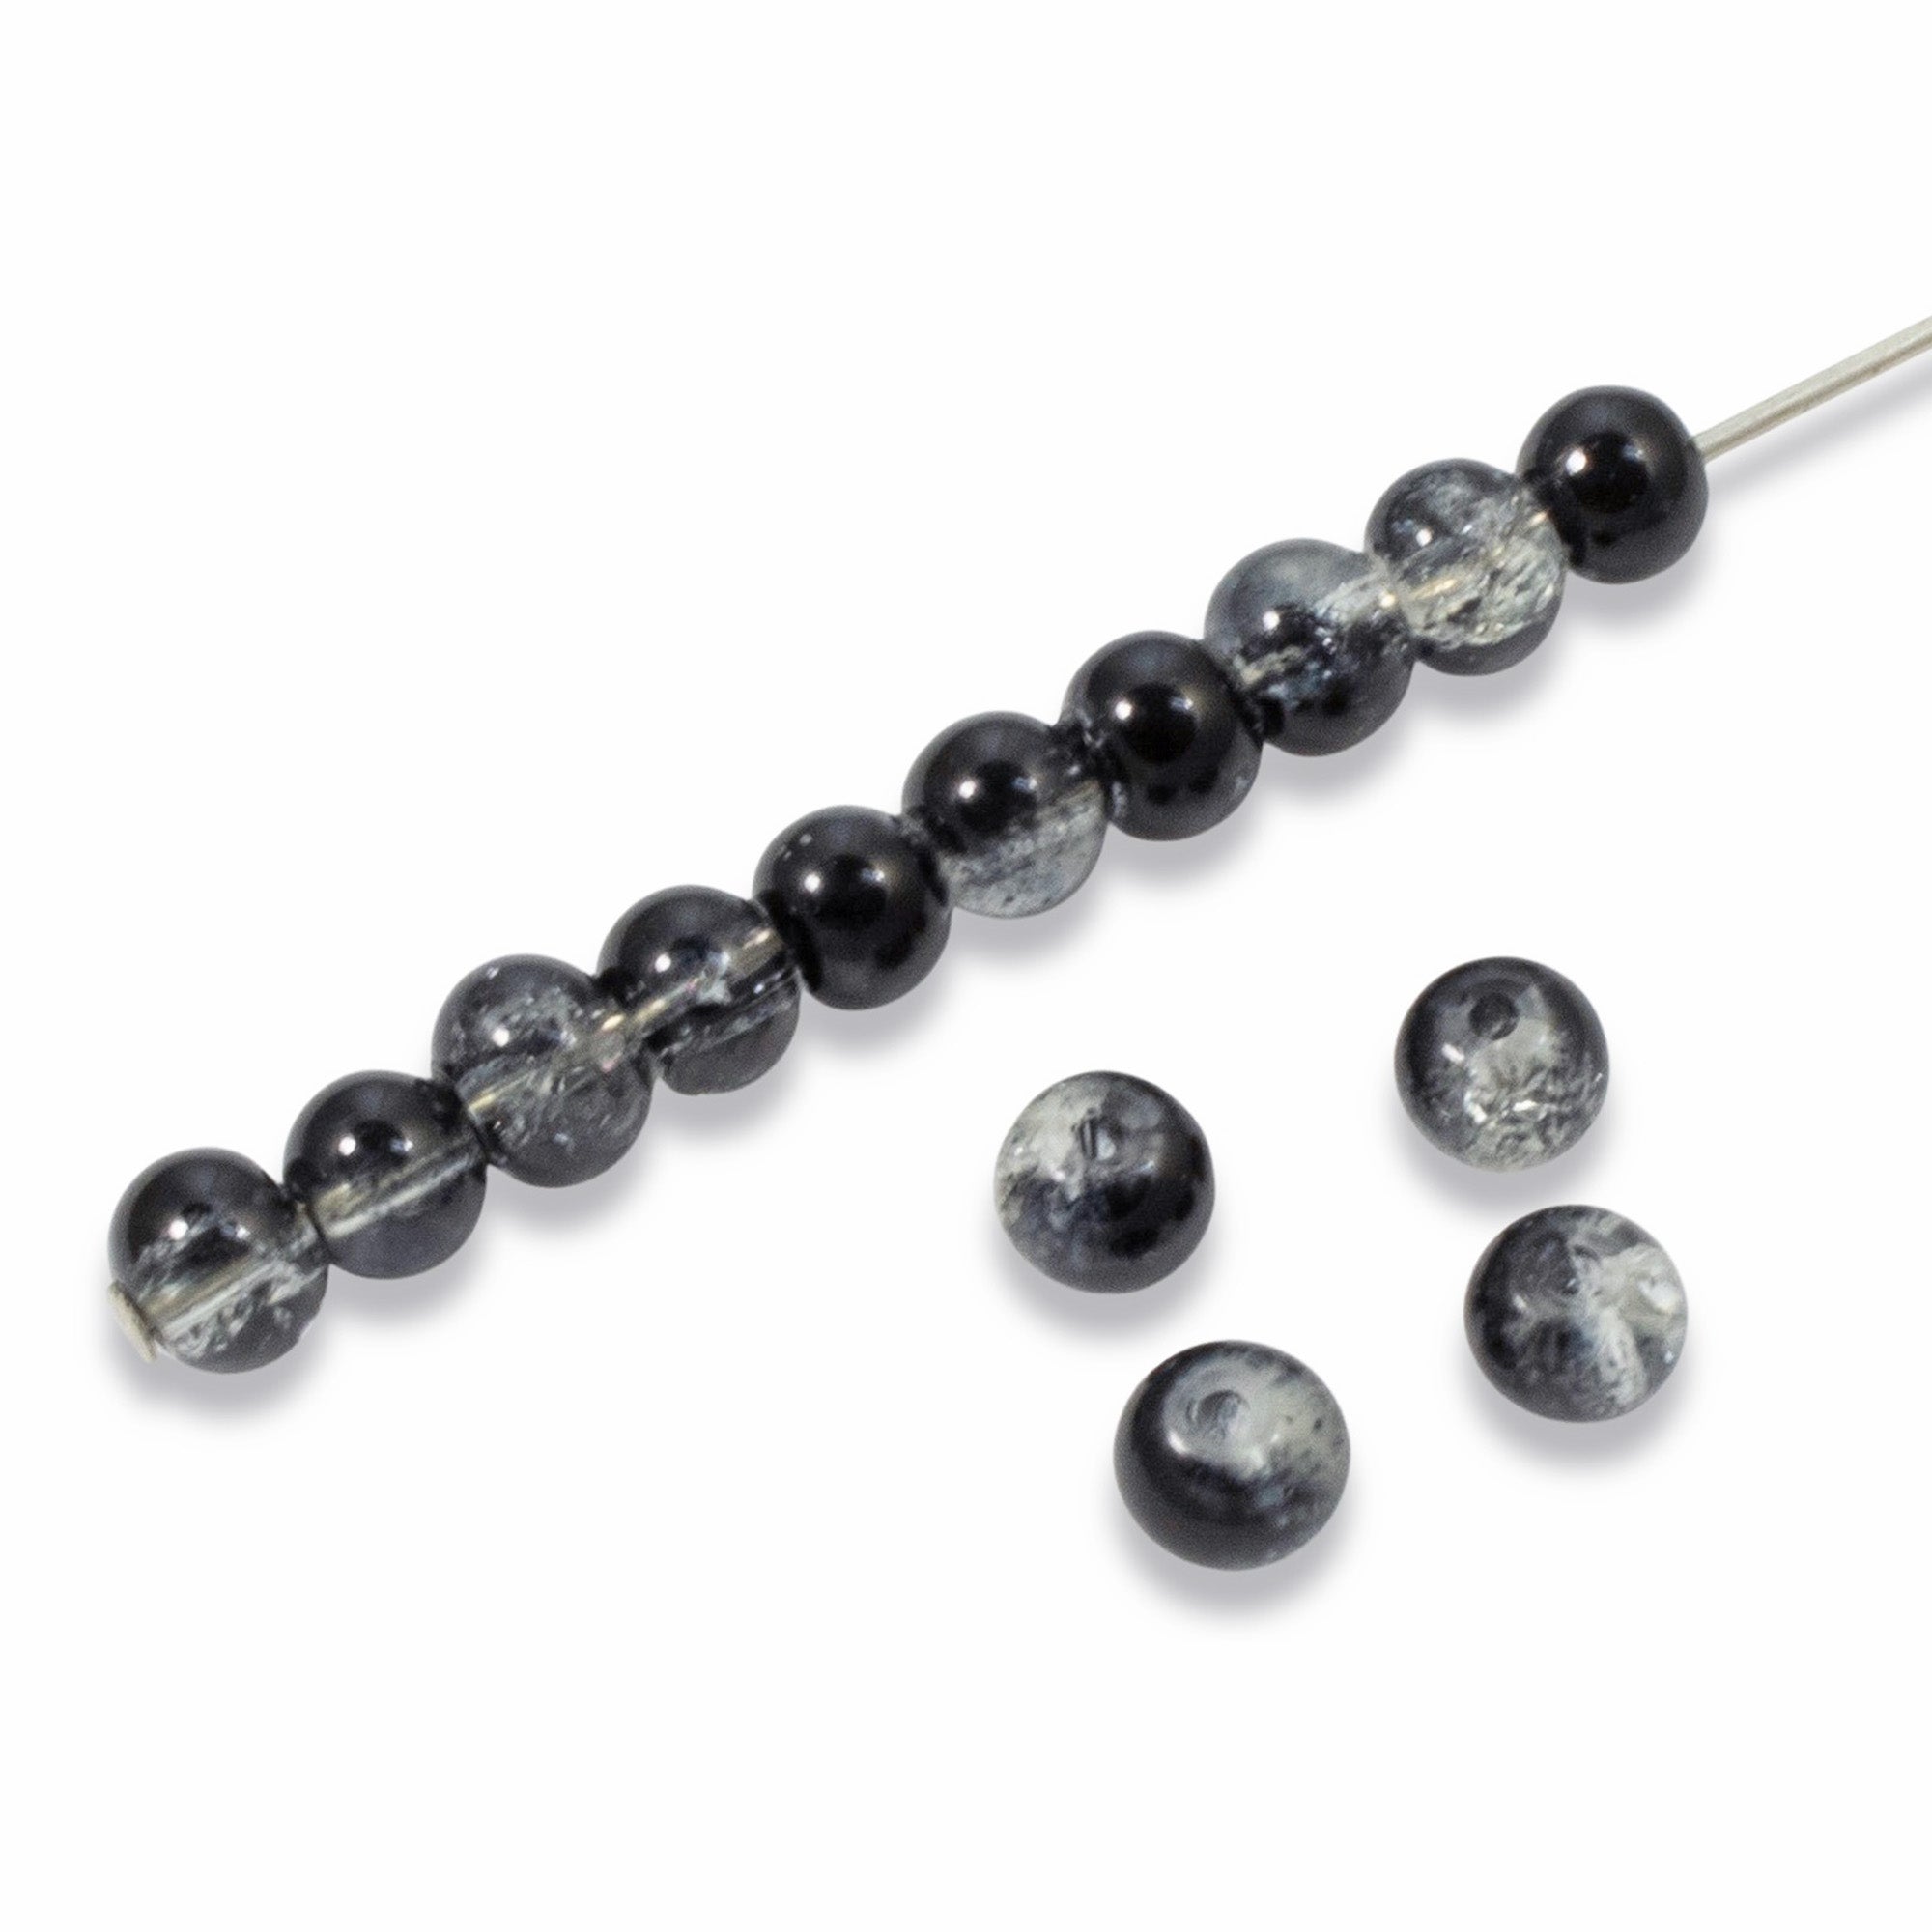 4mm Black & Clear Round Glass Crackle Beads